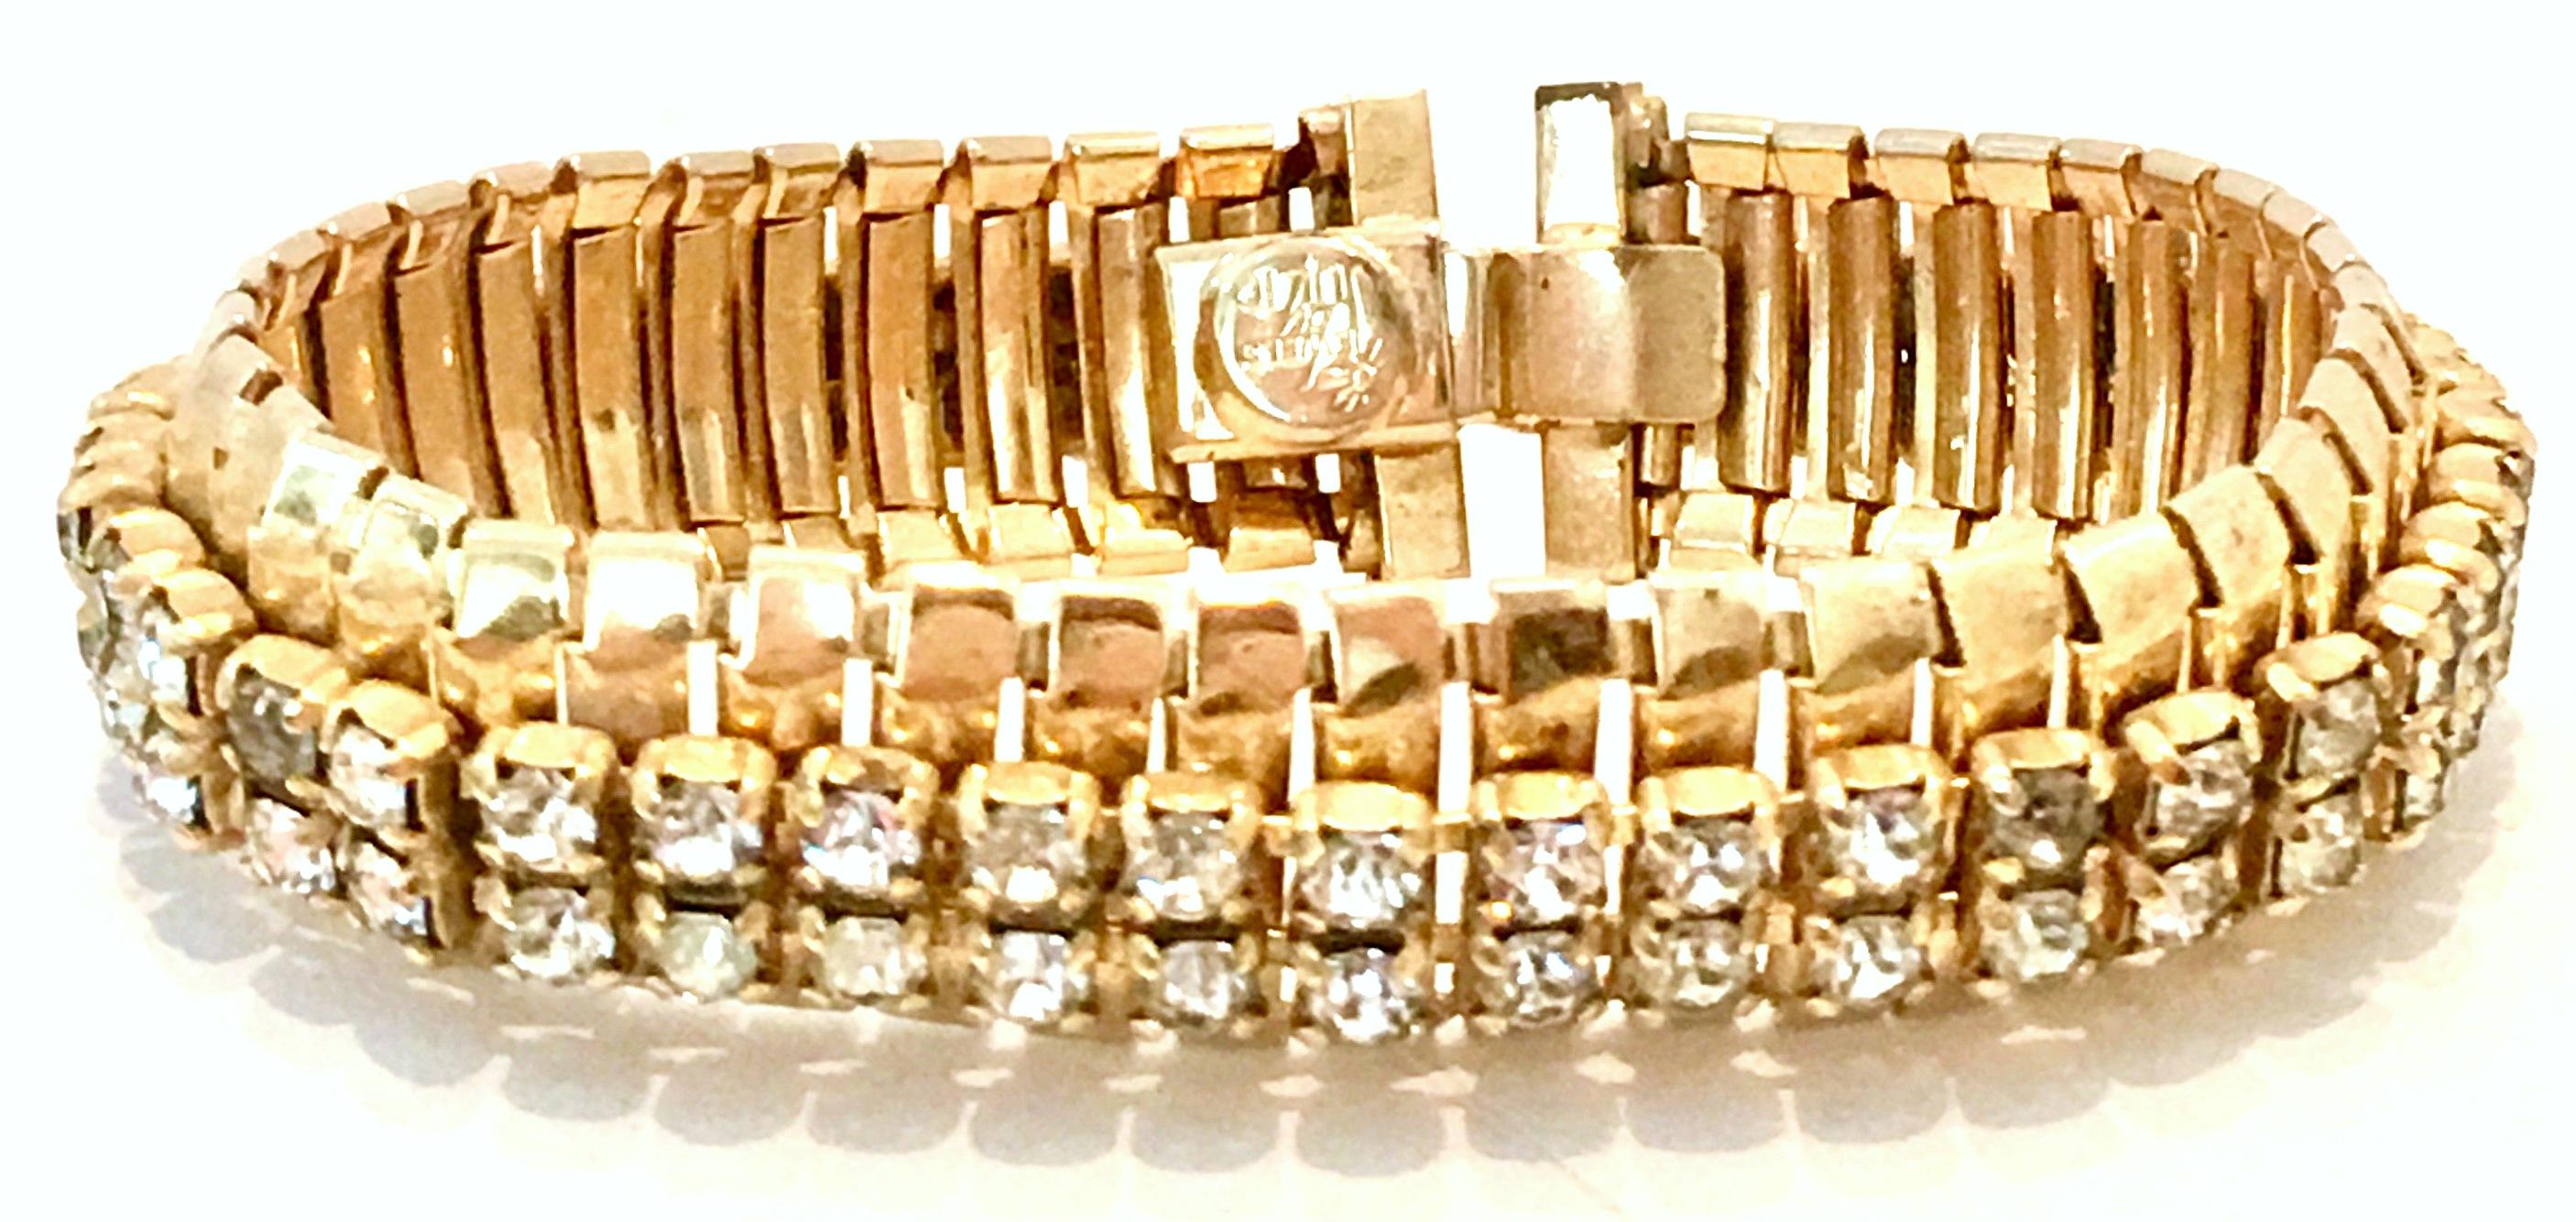 1950'S Gold Plate Link & Swarovski Crystal Rhinestone Bracelet By, Jewels By Julio.
Features prong set crystal clear rhinestones and locking clasp. Signed on the underside, Jewels By Julio.